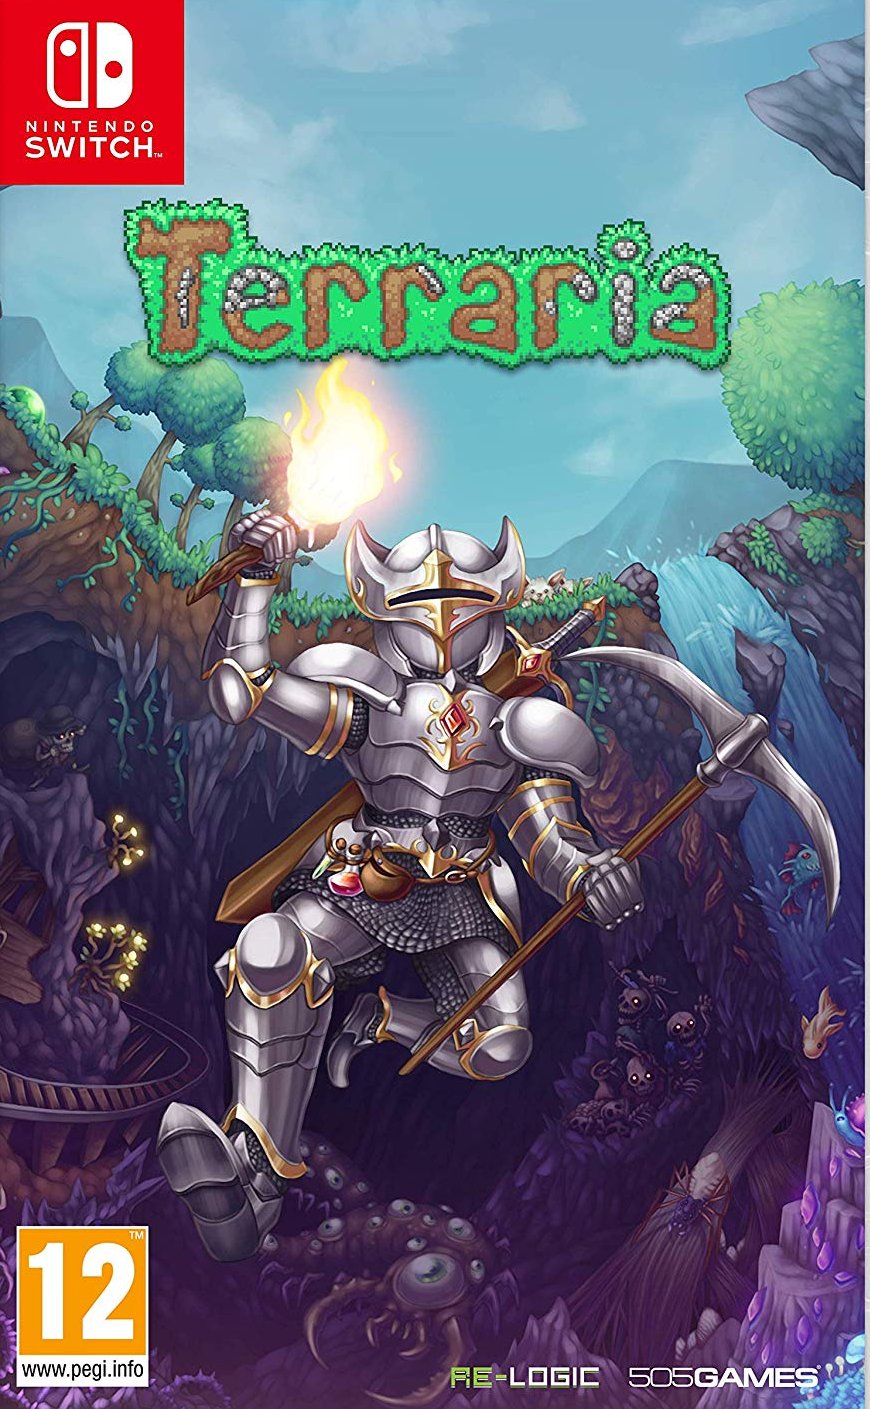 Terraria for Nintendo Switch to launch in digital download form on June 27  - Neowin